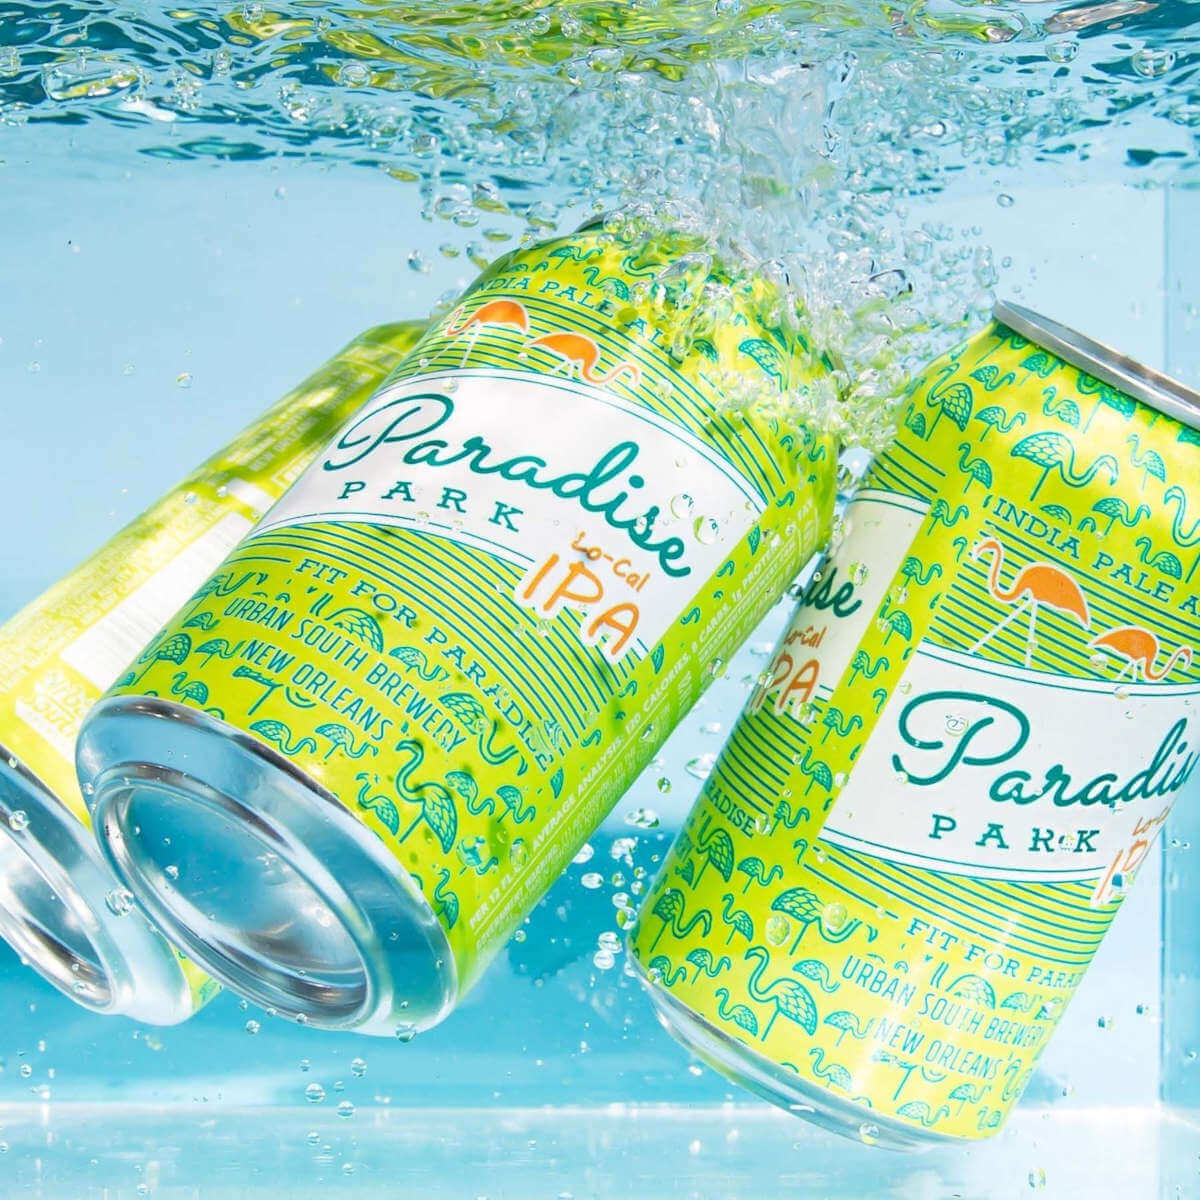 Urban South Brewery introduces its new low-cal IPA, Paradise Park